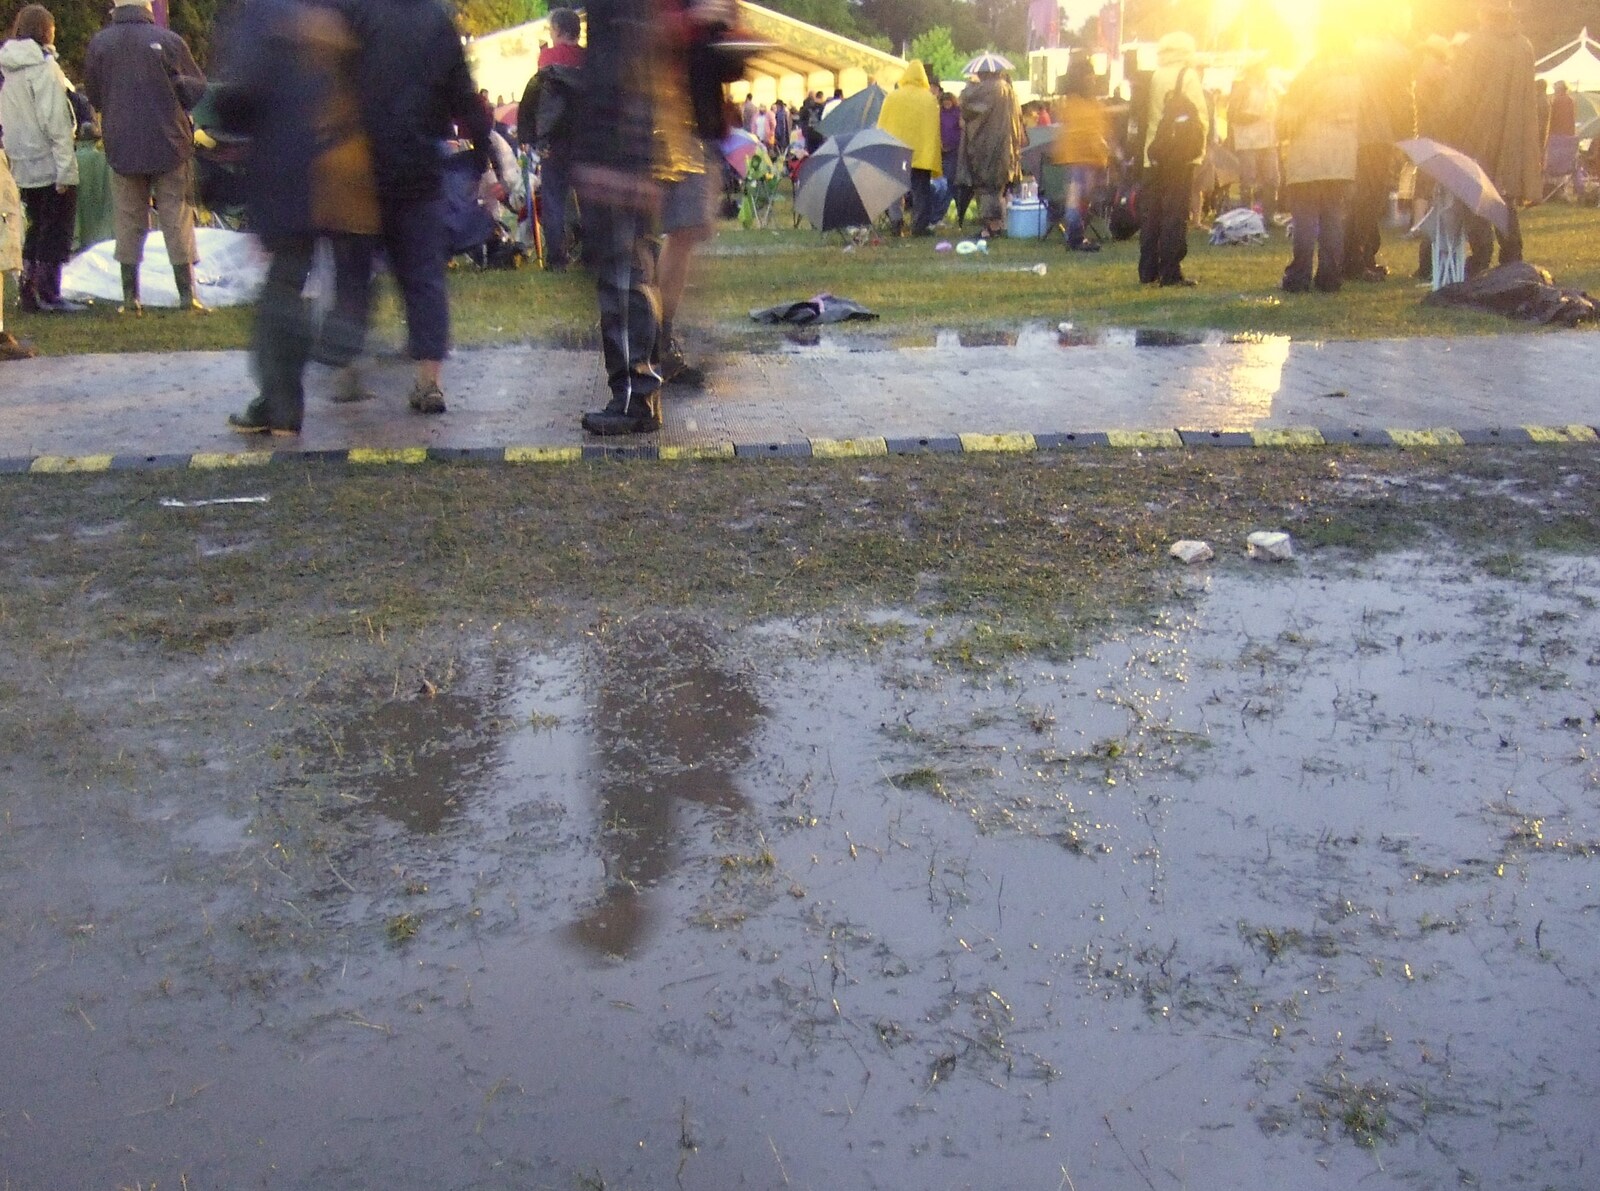 Water-soaked ground from The Cambridge Folk Festival, Cherry Hinton Hall, Cambridge - 1st August 2009